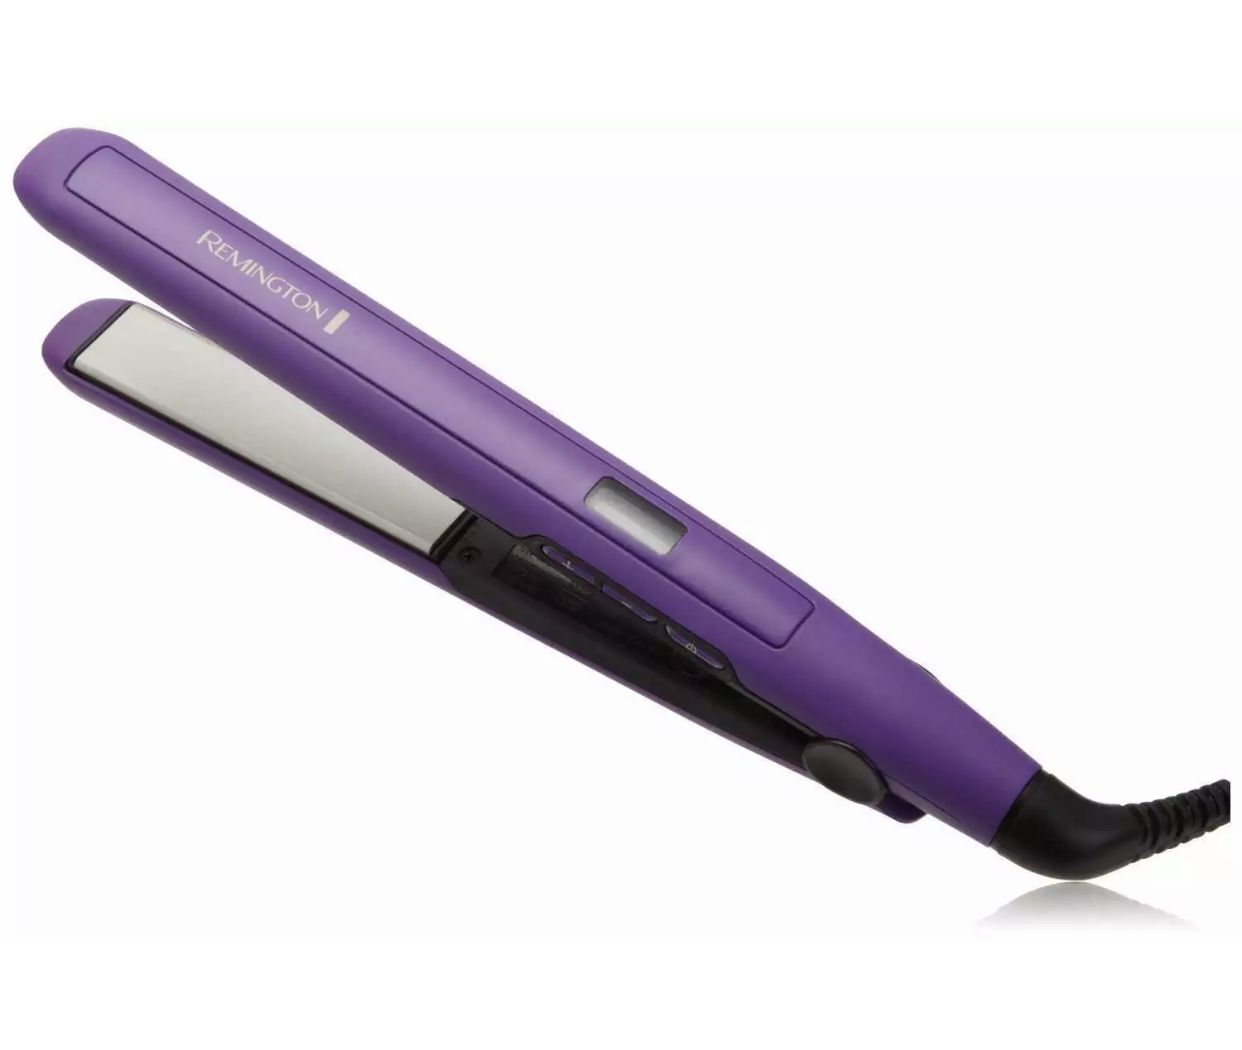 Remington S5500 1" Anti-Static Flat Iron with Floating Ceramic Plates and Digital Controls